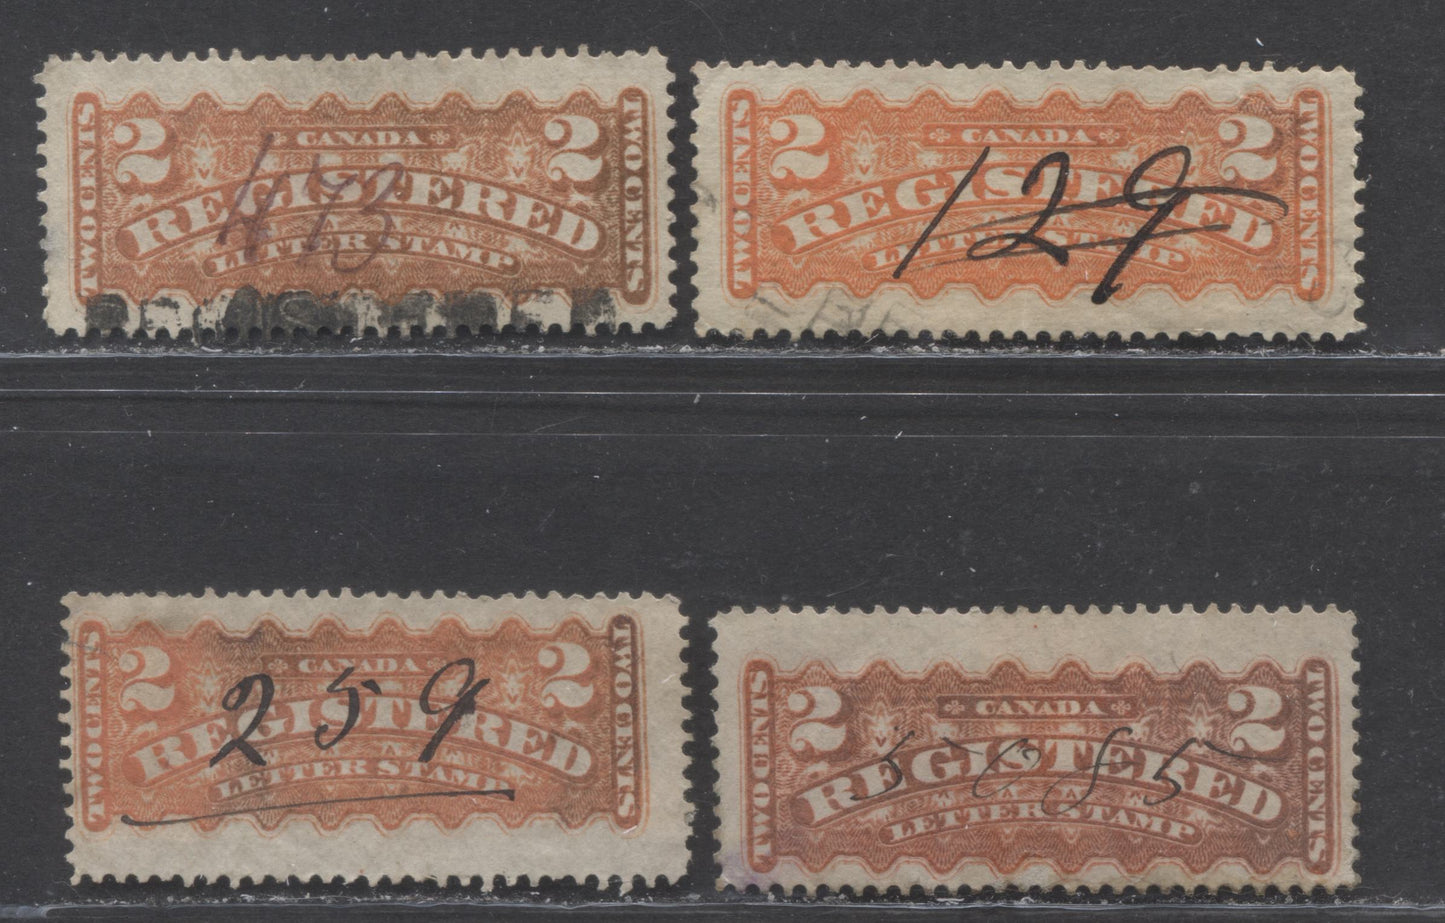 Lot 254 Canada #F1i 2c Orange Red, 1875-1896 Registered Issue, 4 Fine/Very Fine Used Singles Showing Different Manuscript Numeral Cancels, Shades & Papers, Montreal Printings